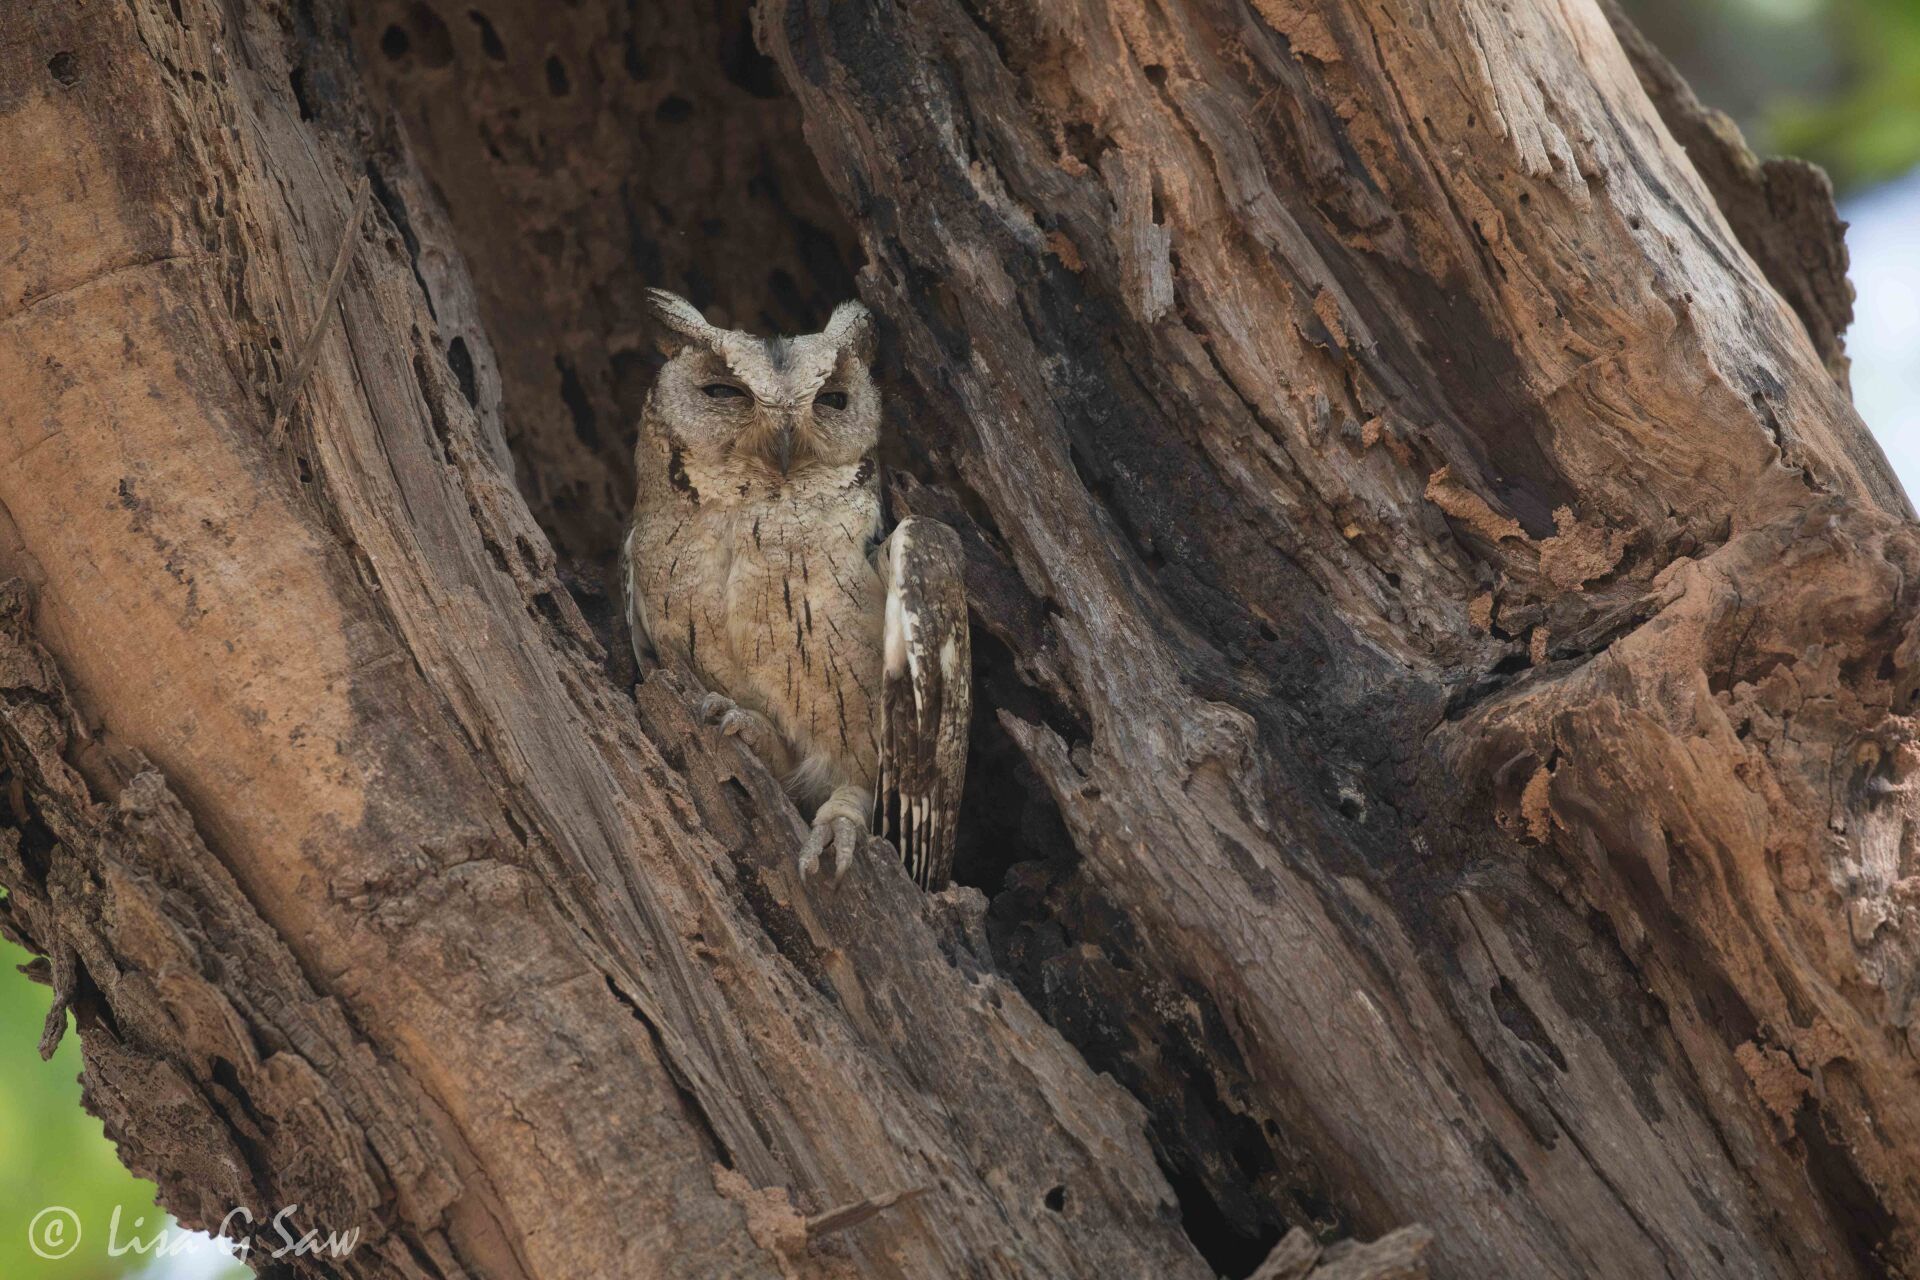 Indian Scops Owl blending in with wood in India